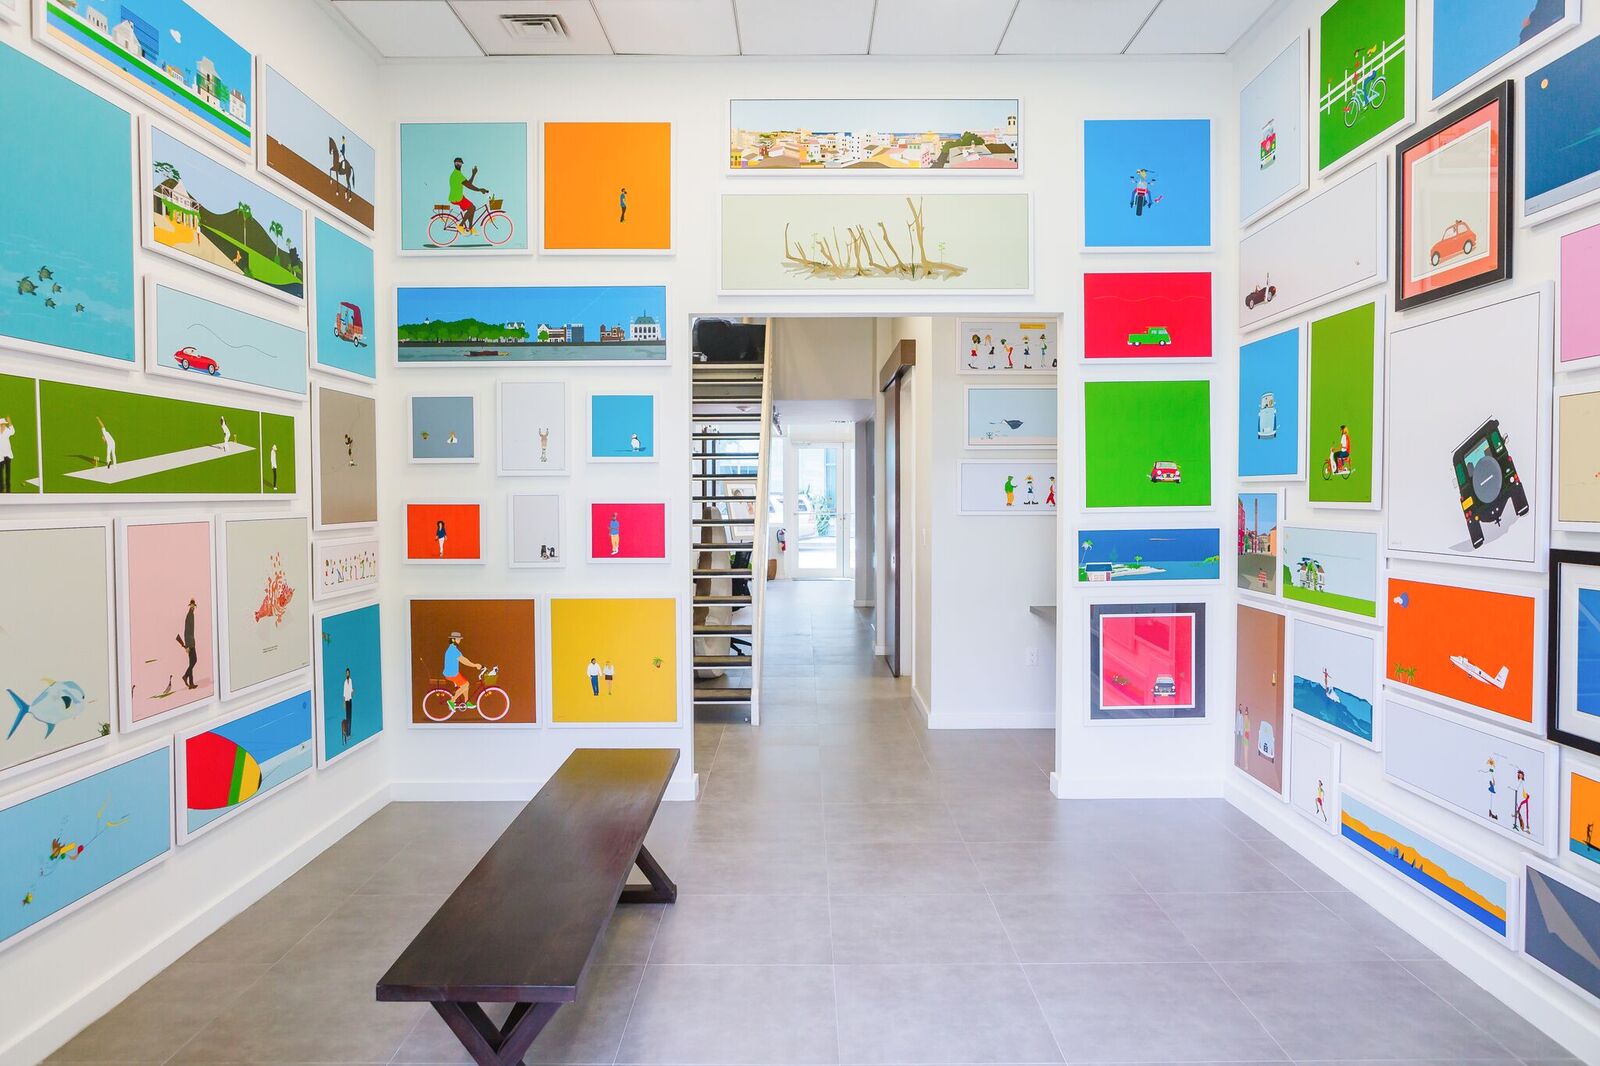 The Dreadyworld Gallery at Picture This Studios